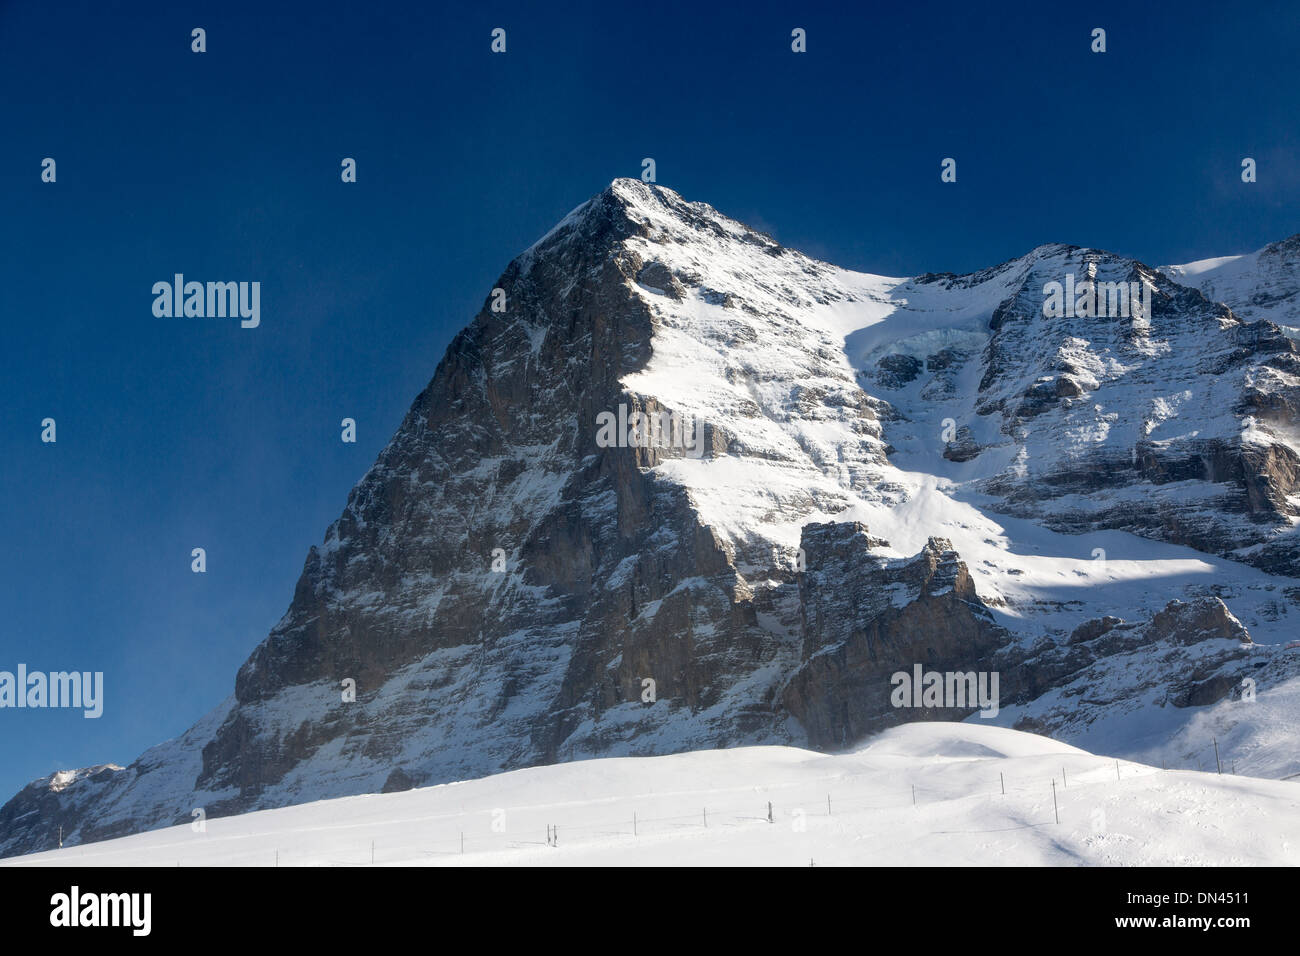 The north face of the Eiger mountain, Bernese Alps, Switzerland Stock Photo  - Alamy